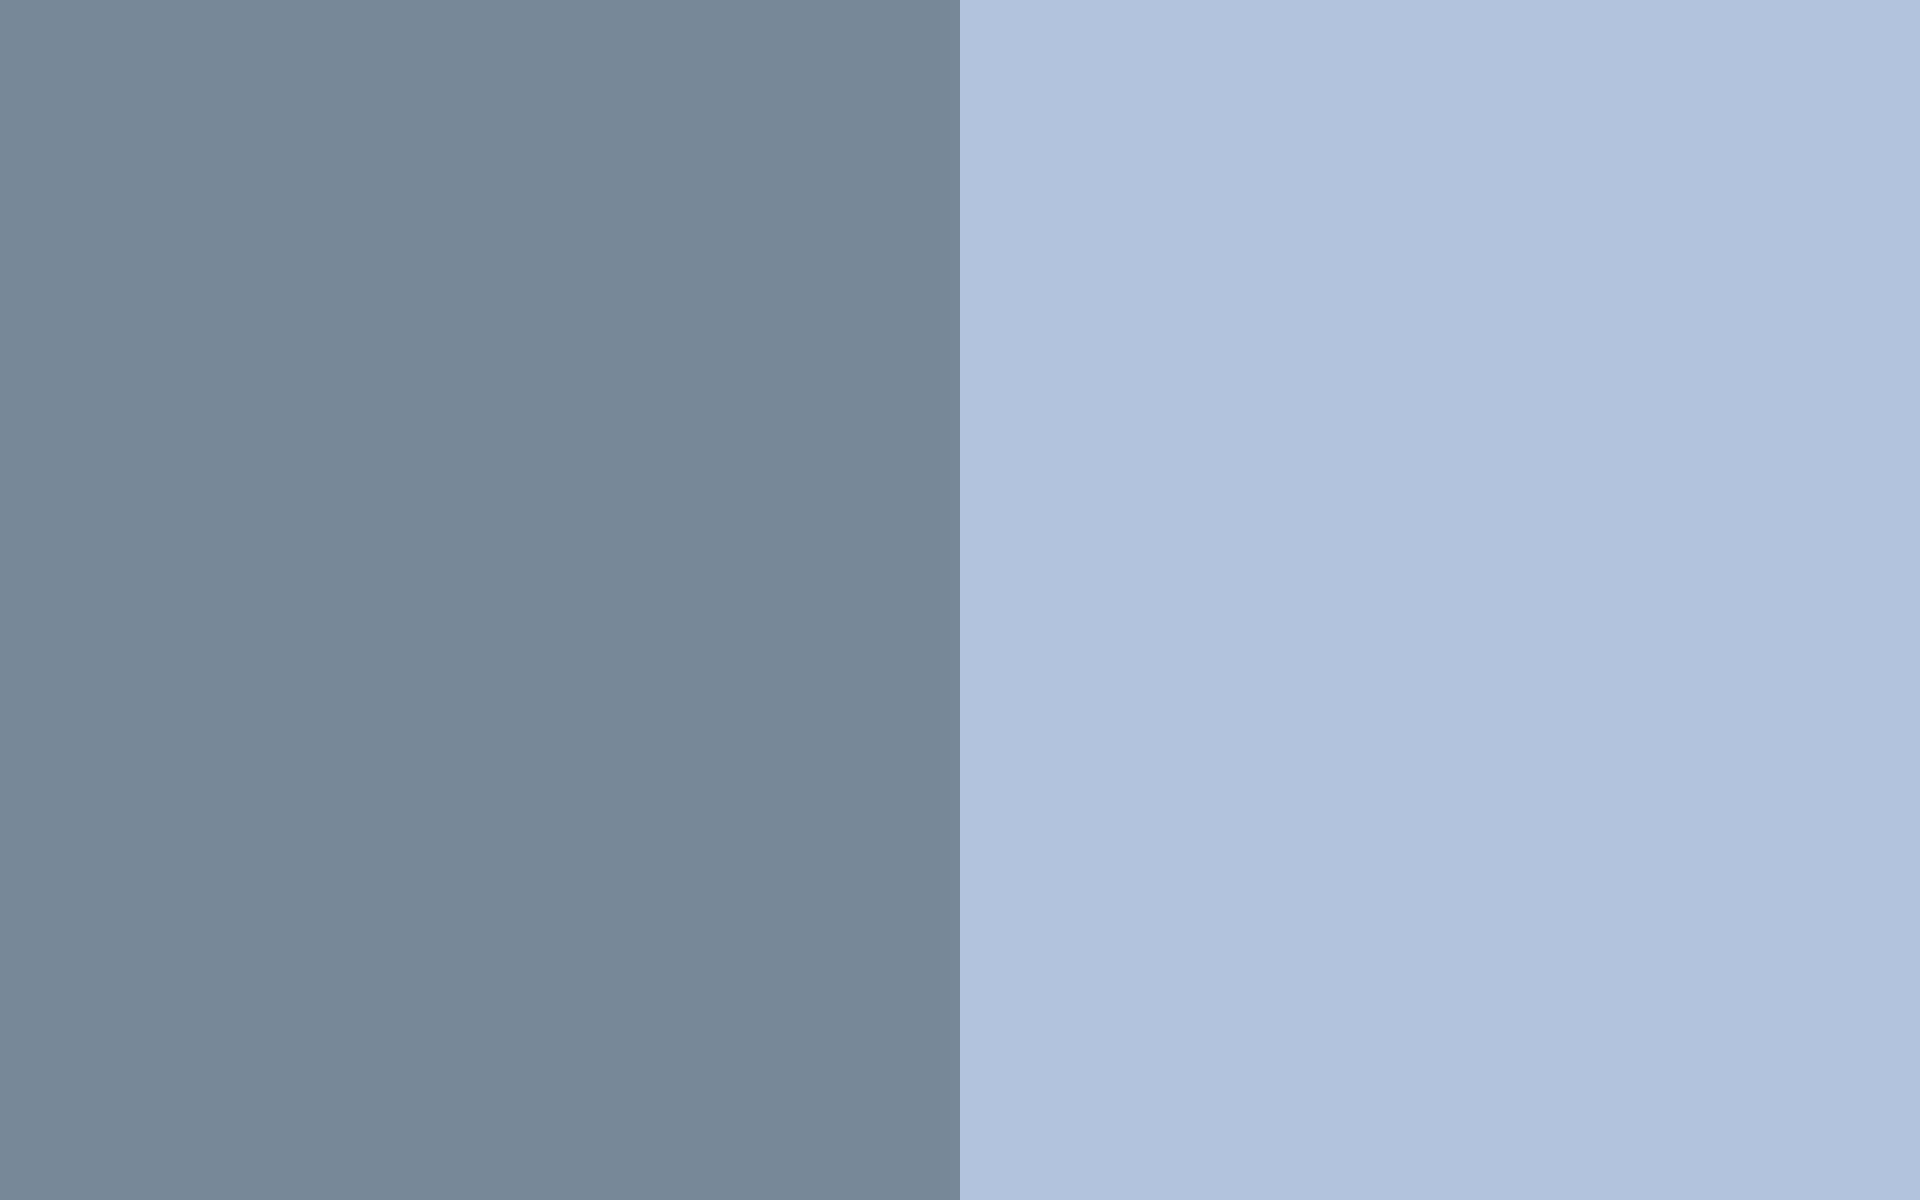 An Intricate Blue and Gray Design Wallpaper